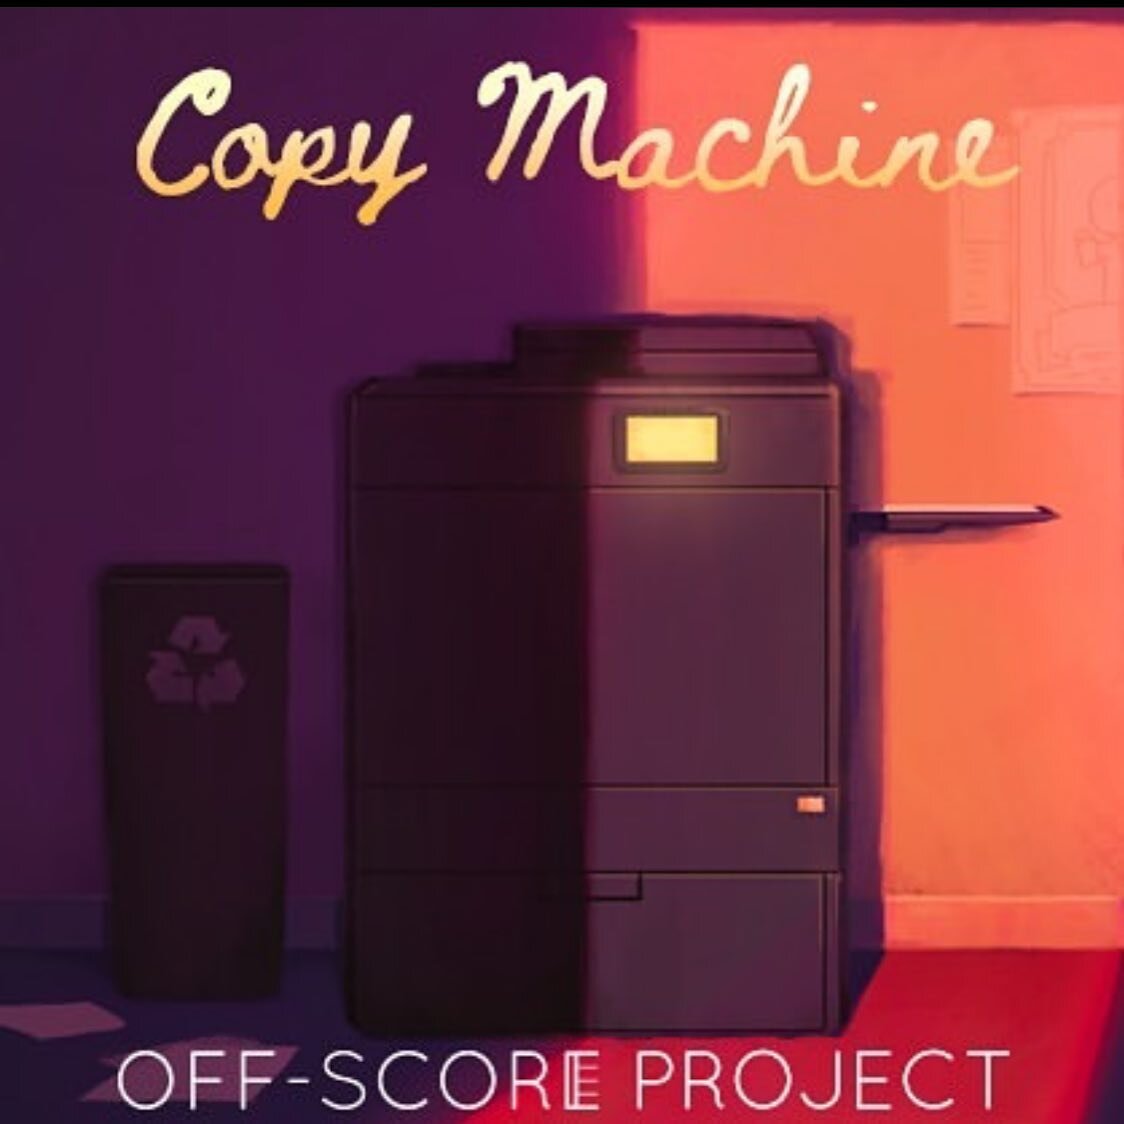 You guyyyys my friend @vanjamrgan is working on a sweet interactive game that&rsquo;s half musical delight and half puzzle! The first track in the album (The Offscore Project) is called &ldquo;Copy Machine&rdquo; and you should check it ouuuuut. Go a